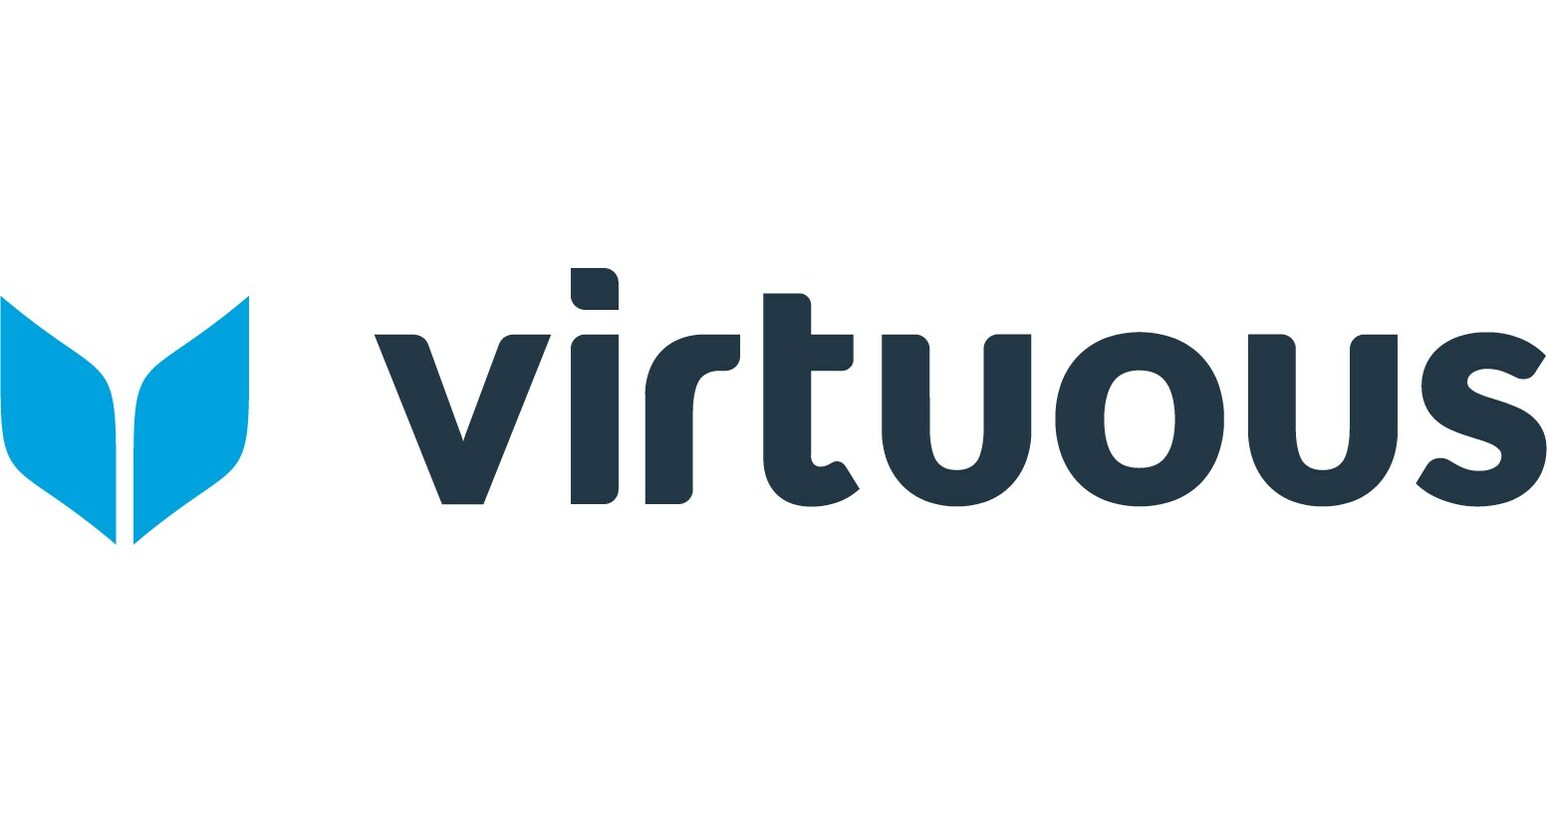 Virtuous Launches New Version of RaiseDonors, Designed to Improve the Online Giving Experience to Drive Increased Giving to Nonprofits